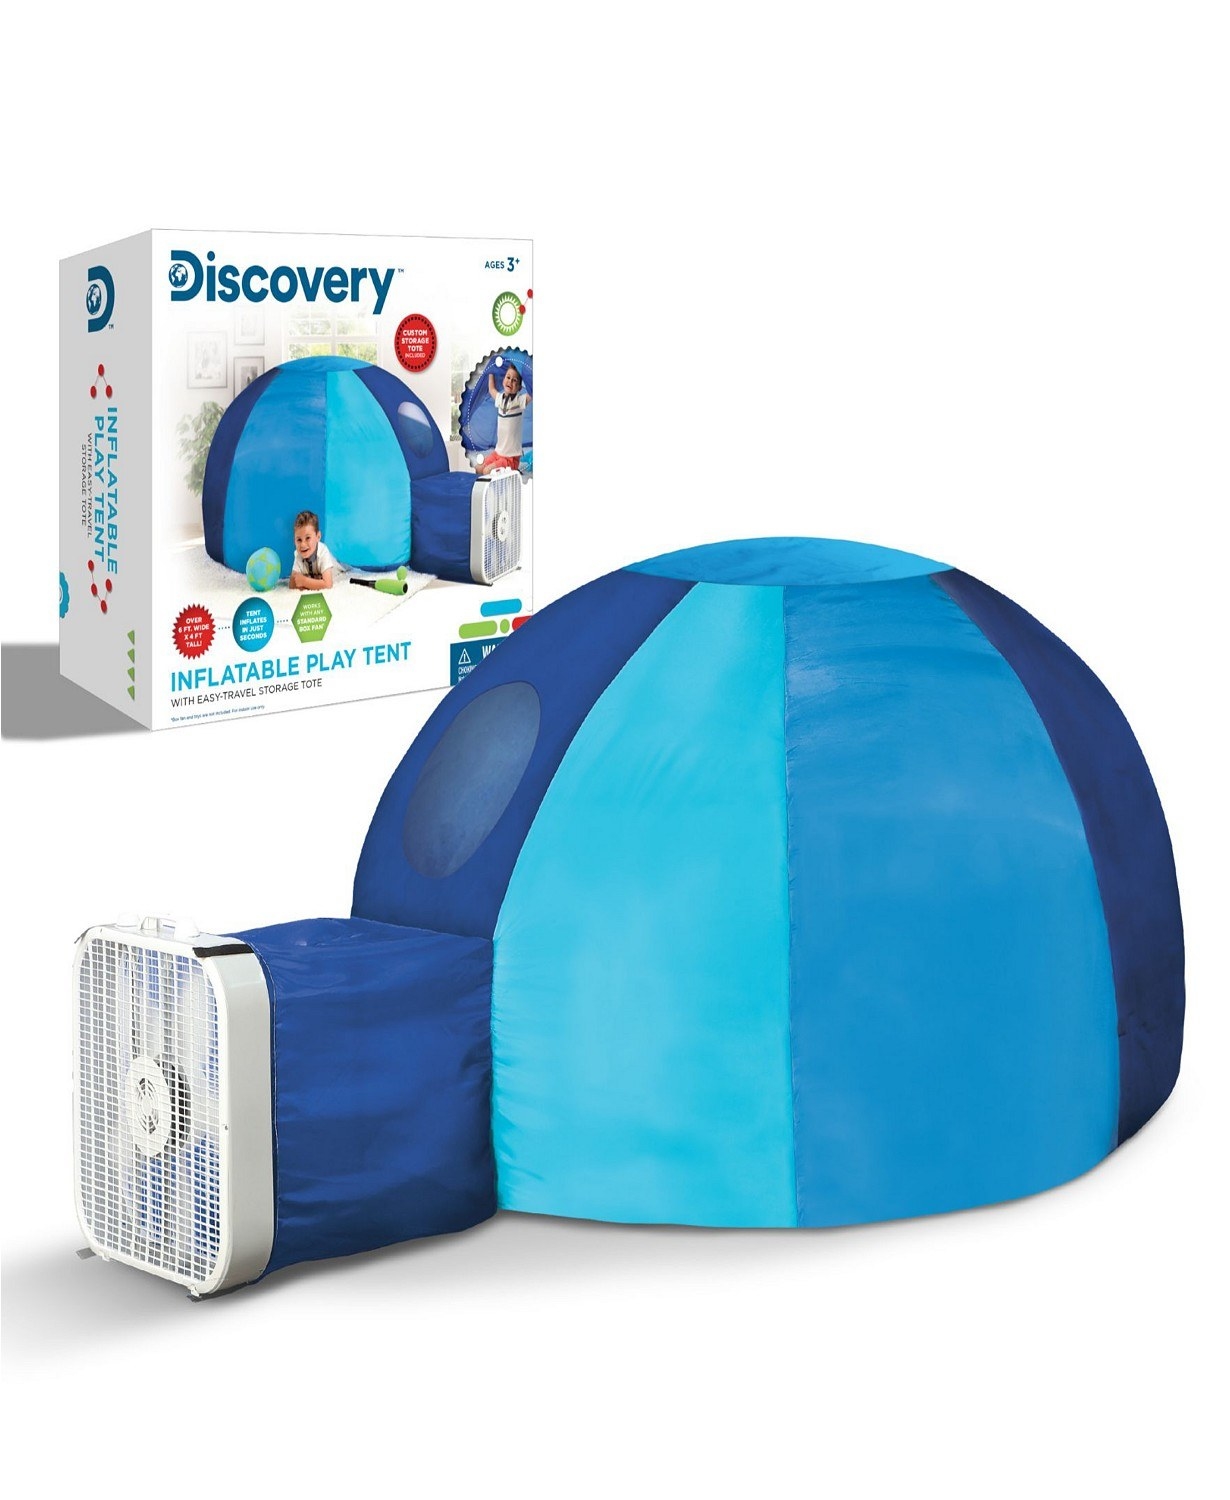 The inflatable tent